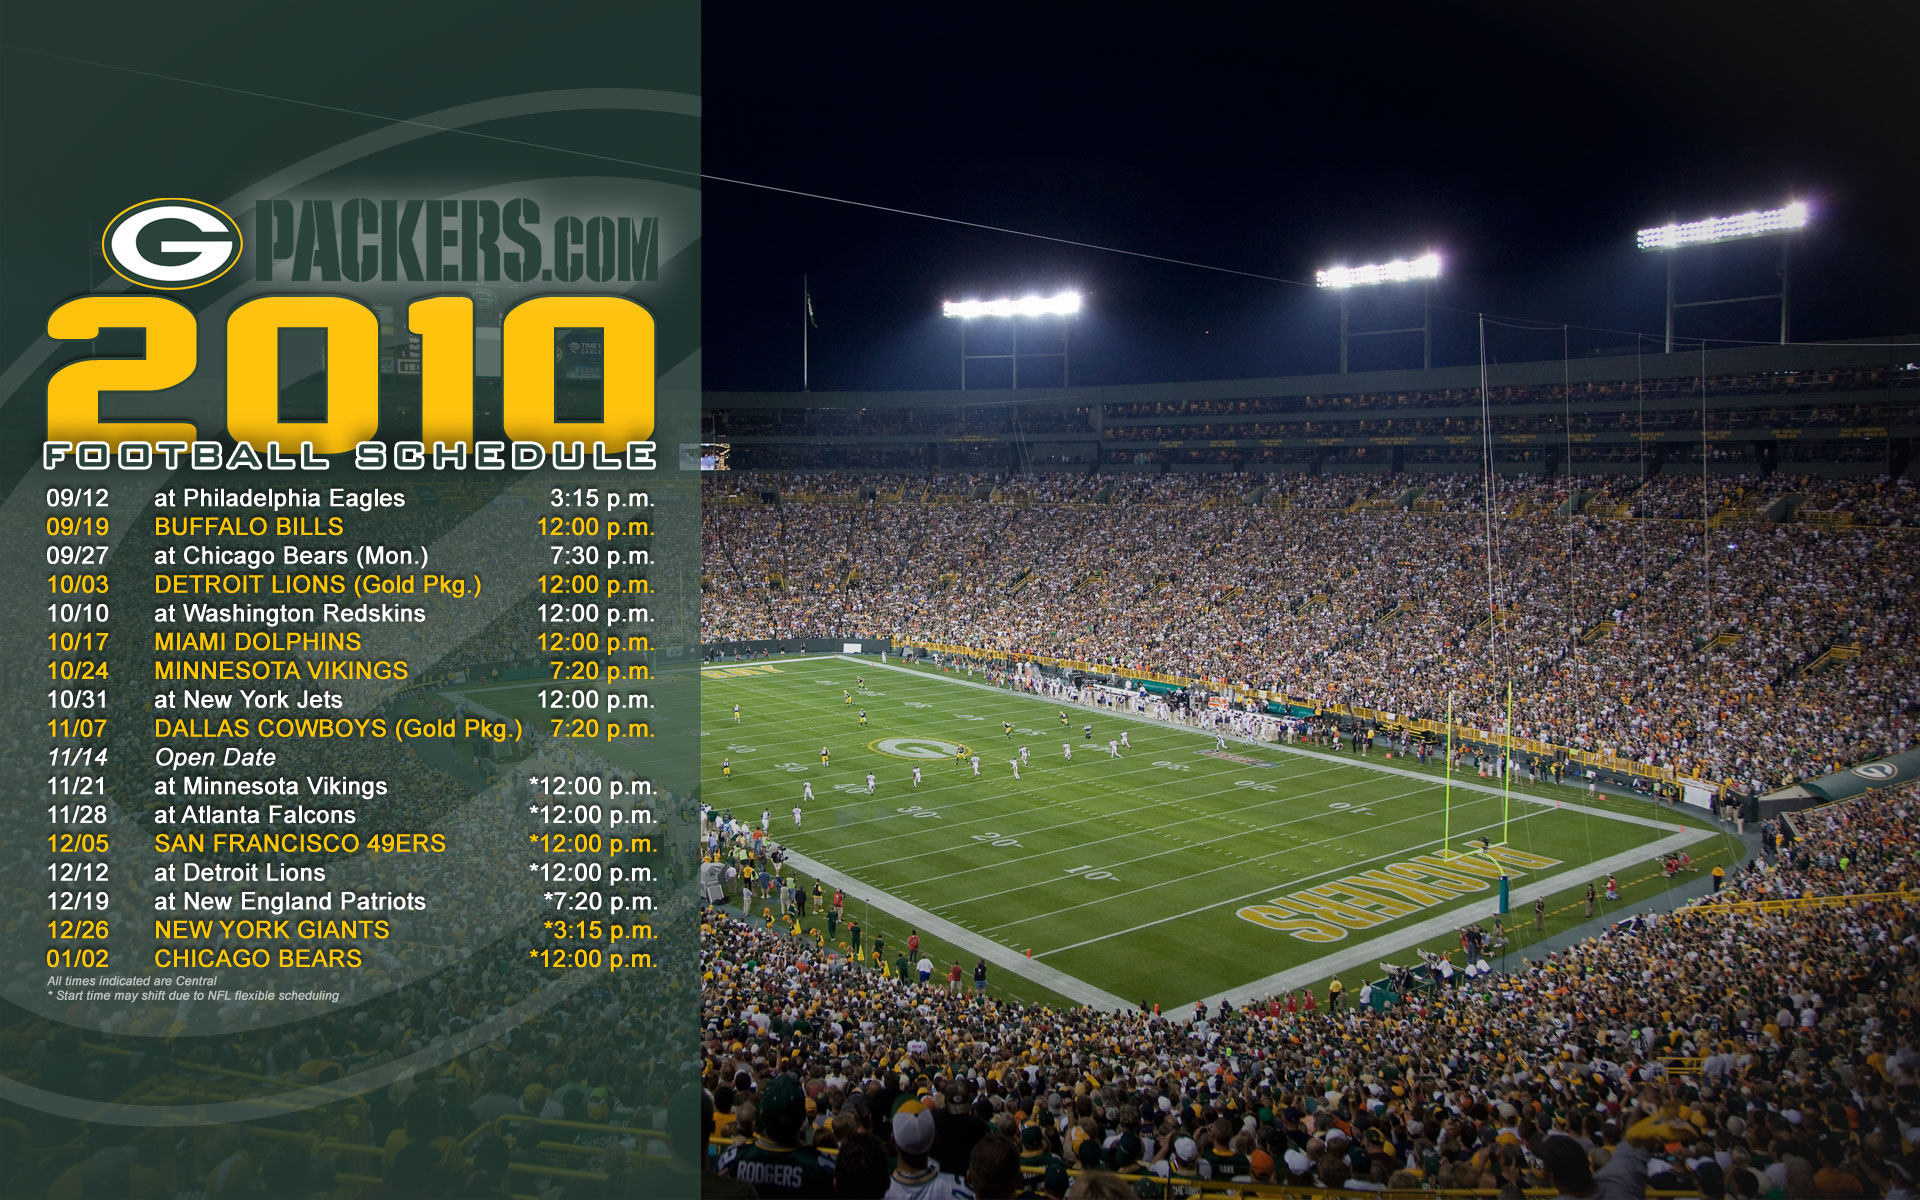 Packers Com Wallpapers - Green Bay Packers 2010 Schedule - HD Wallpaper 